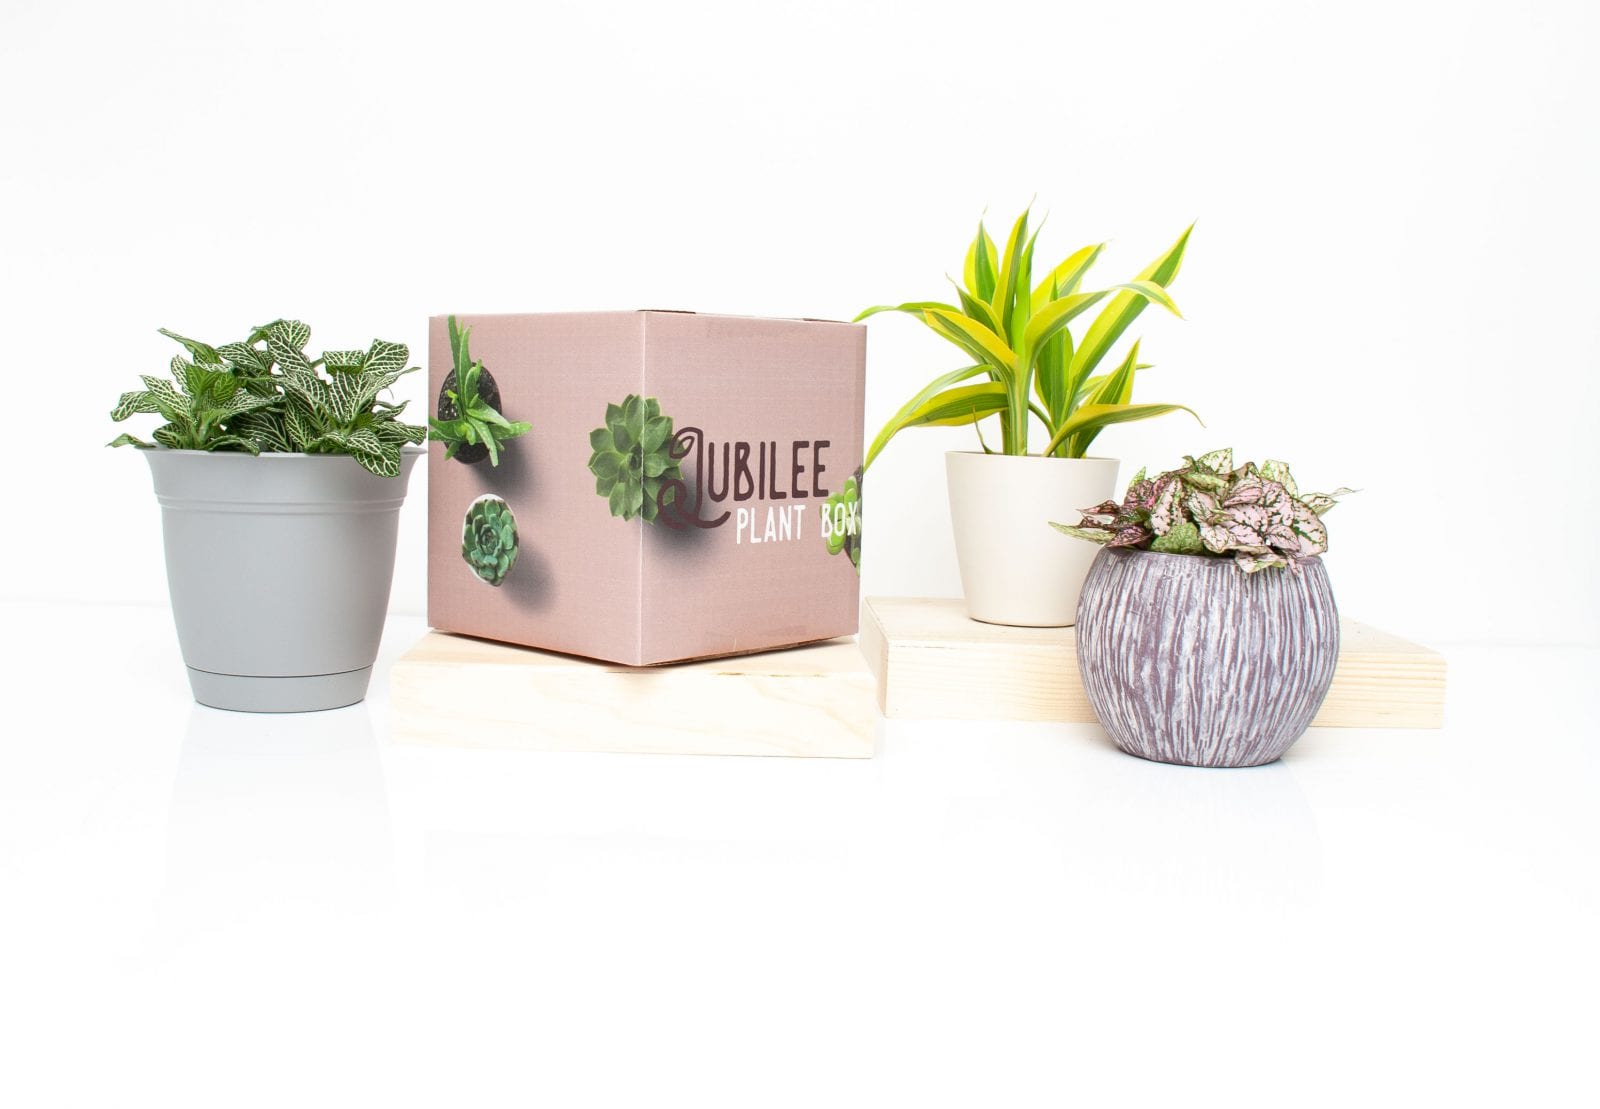 Image of Jubilee plant box with various plants in vases